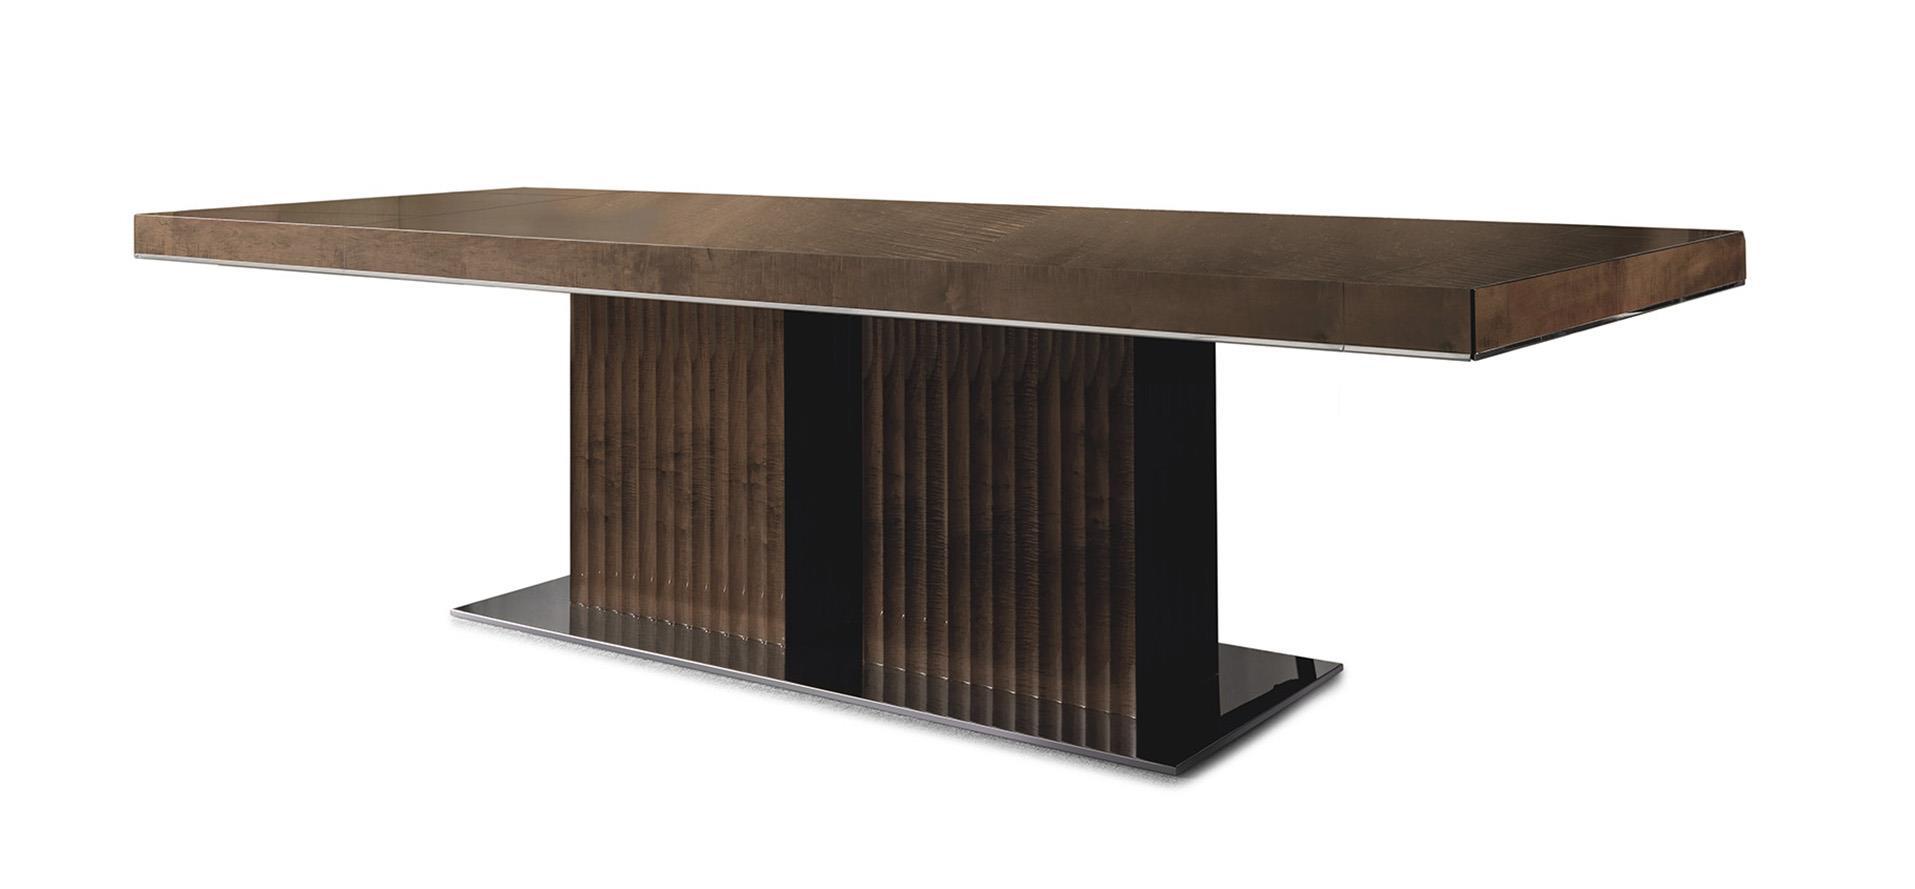 Extendable Table with Fine Wood and Metal Accents